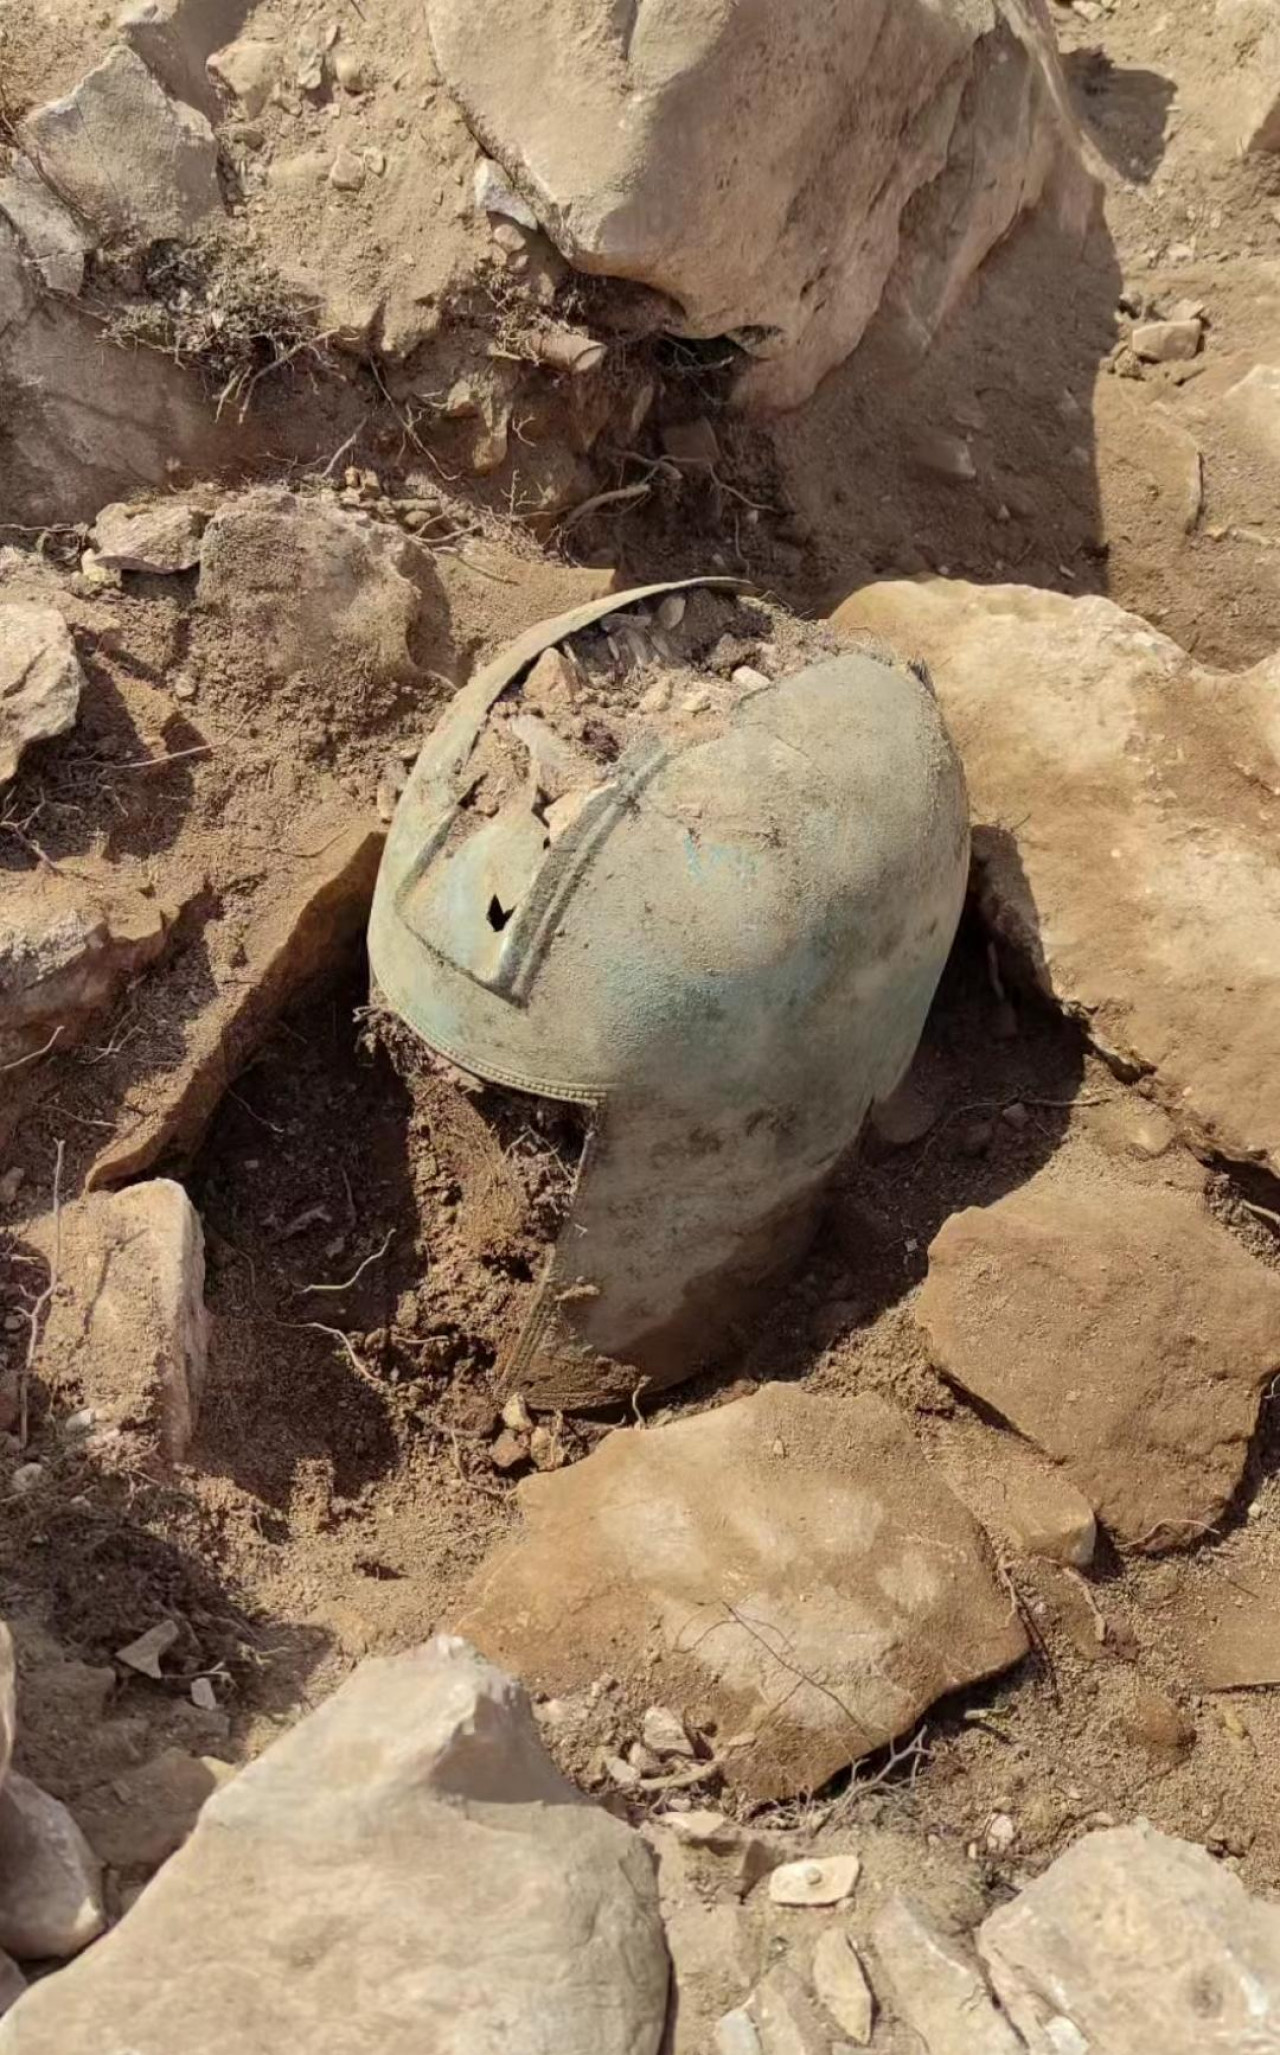 A 2500-year-old perfectly preserved bronze helmet has been discovered in Croatia